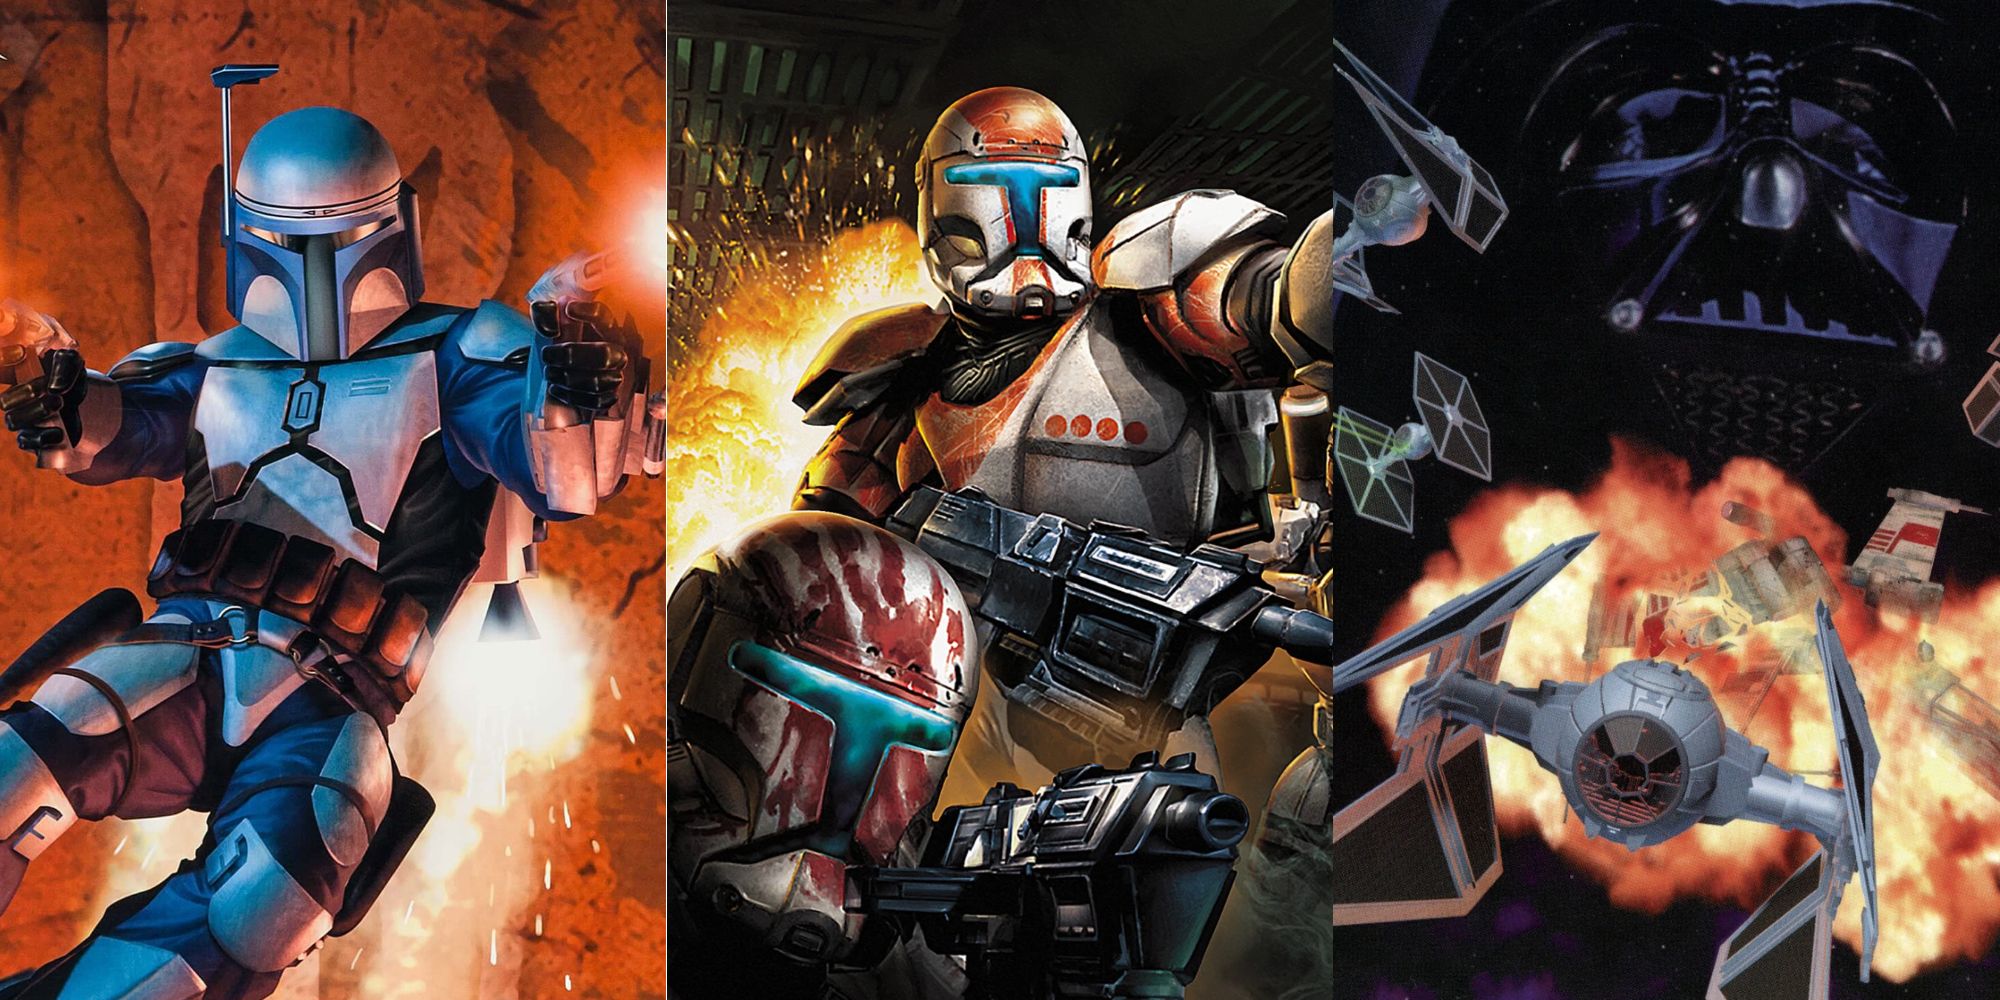 A split image showing three Star Wars games where the player isn't a Jedi: Bounty Hunter, Republic Commando, and TIE Fighter.